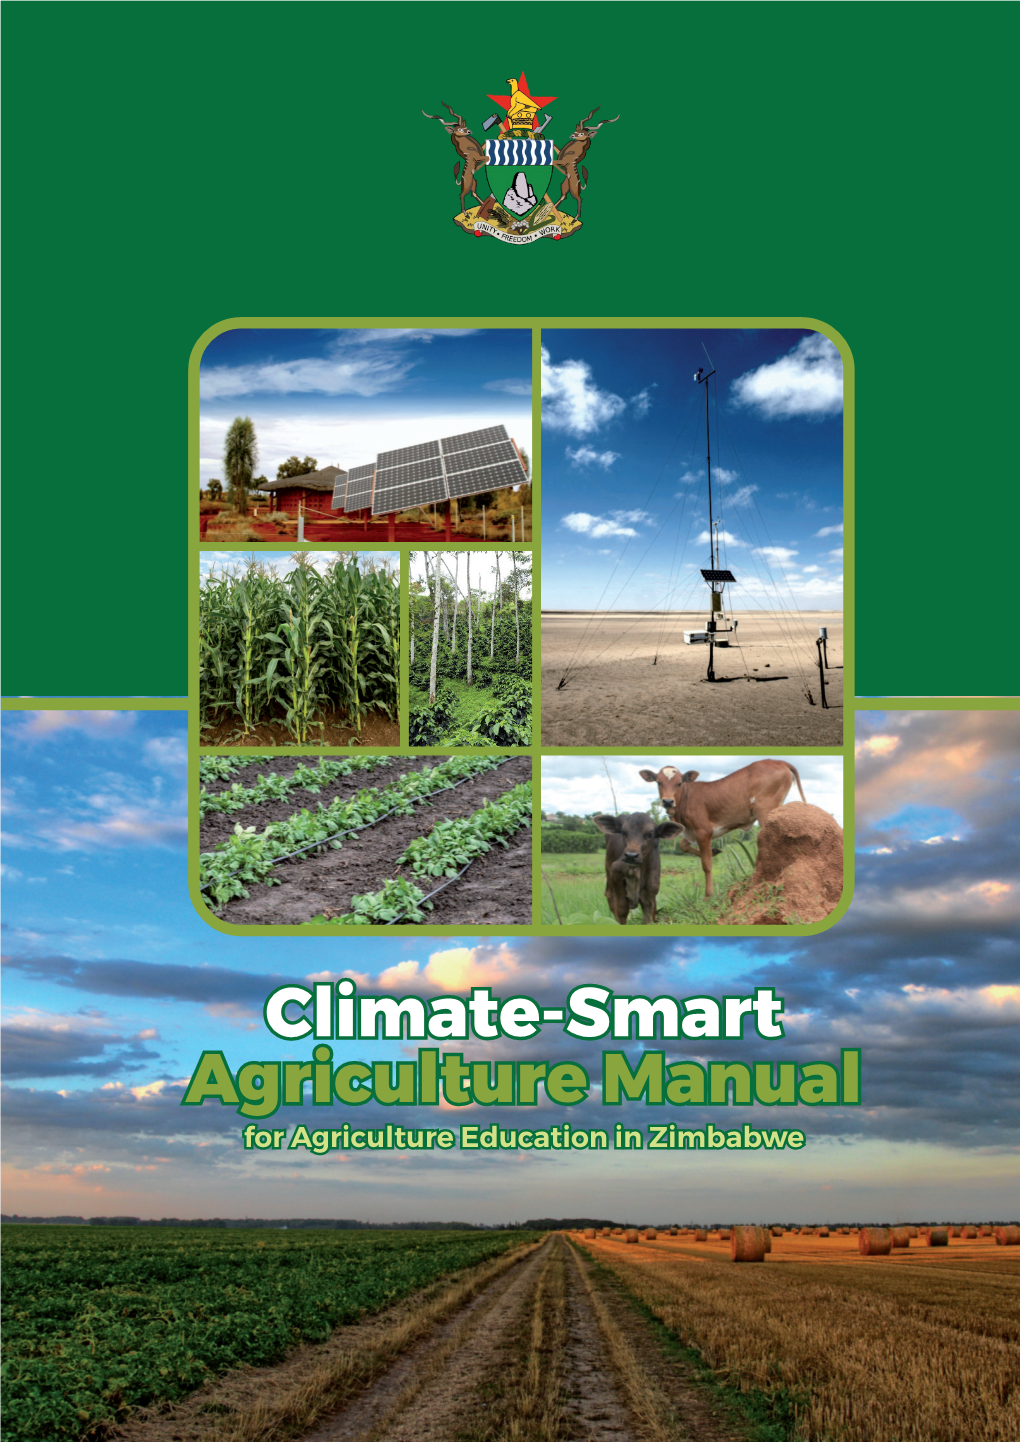 Climate-Smart Agriculture Manual for Zimbabwe, Climate Technology Centre and Network, Denmark, 2017